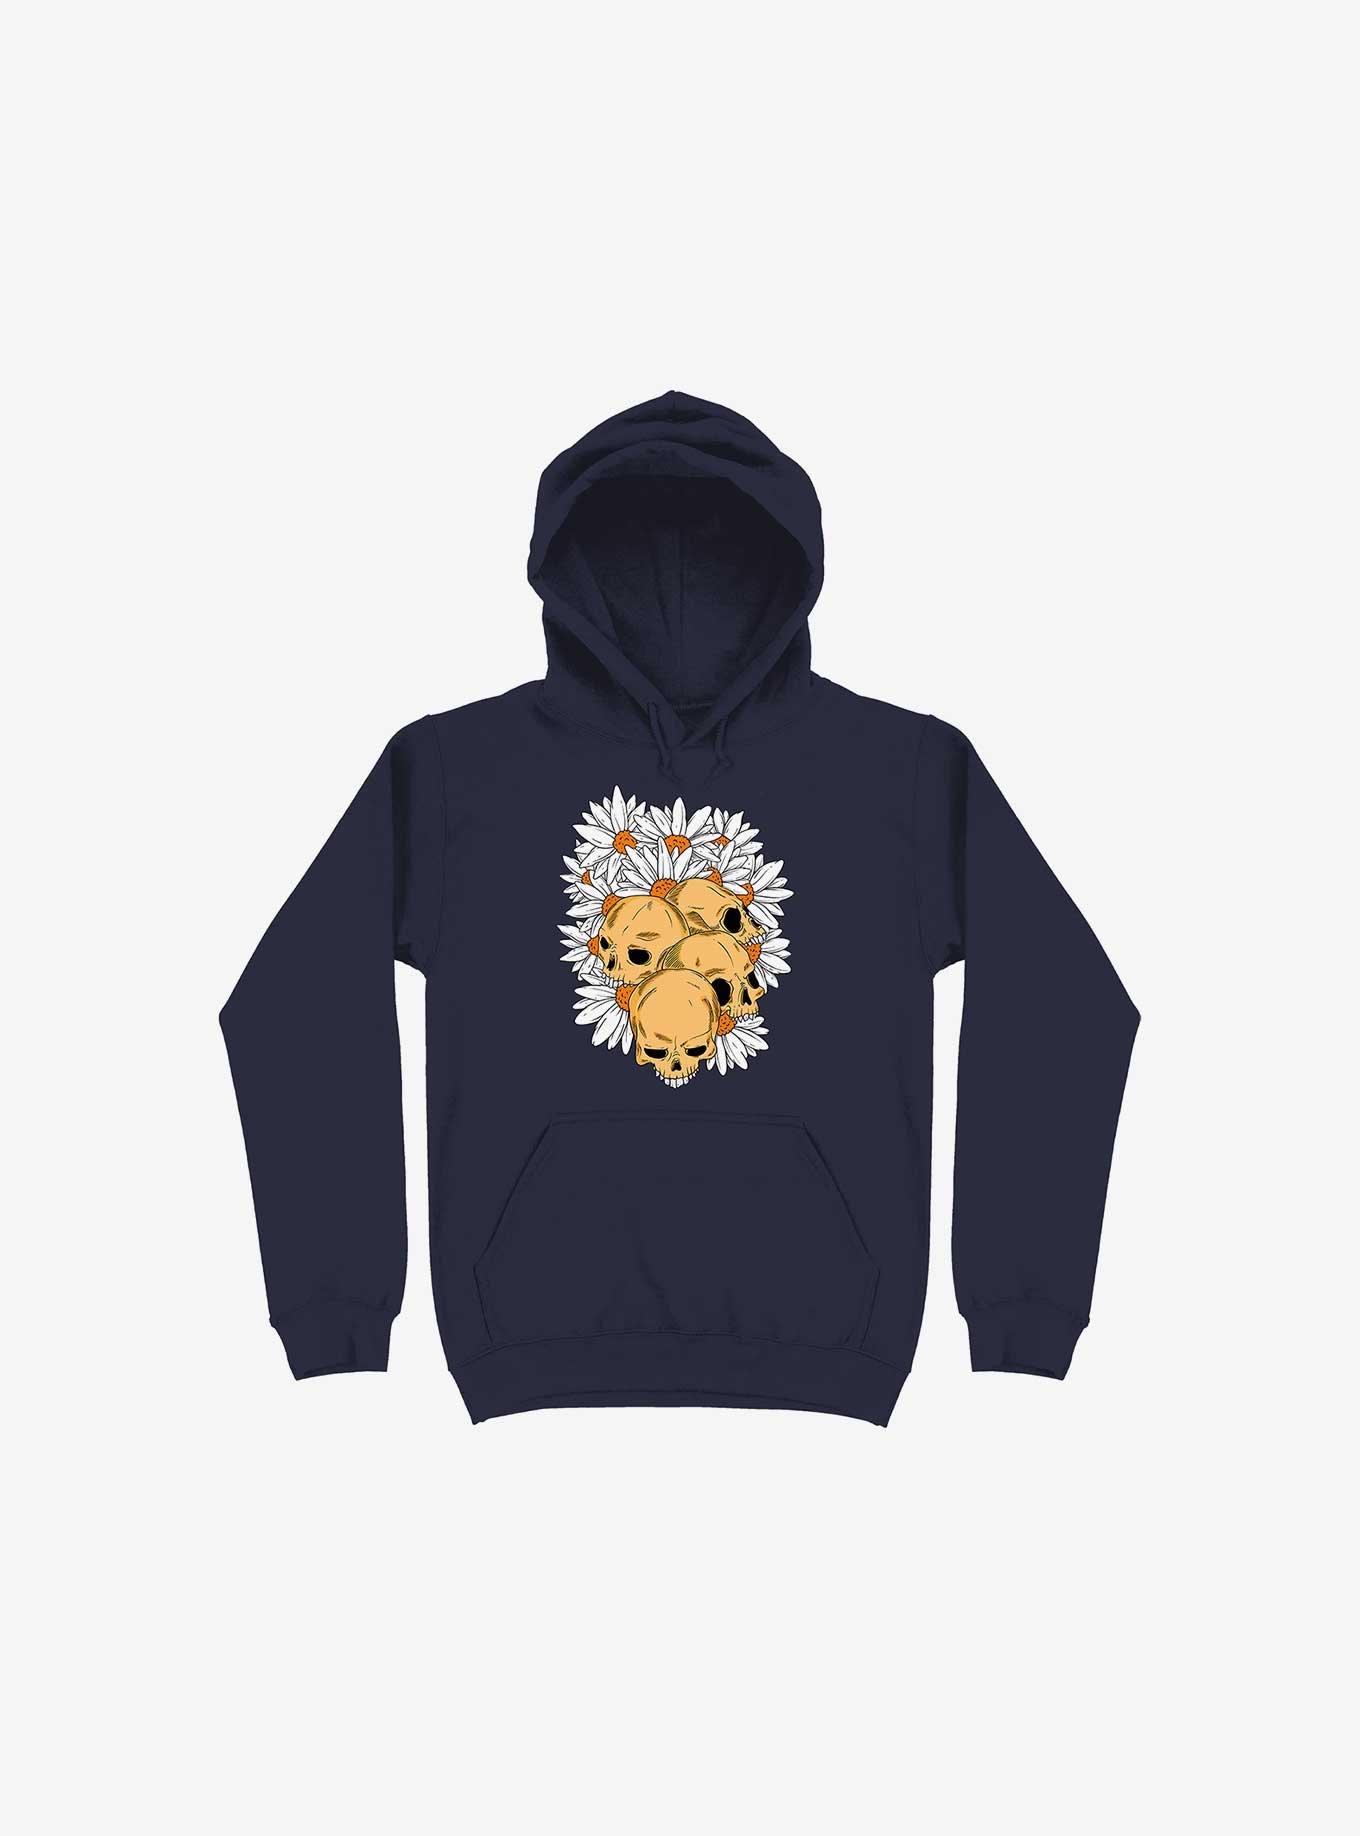 Skull Have Chance Navy Blue Hoodie